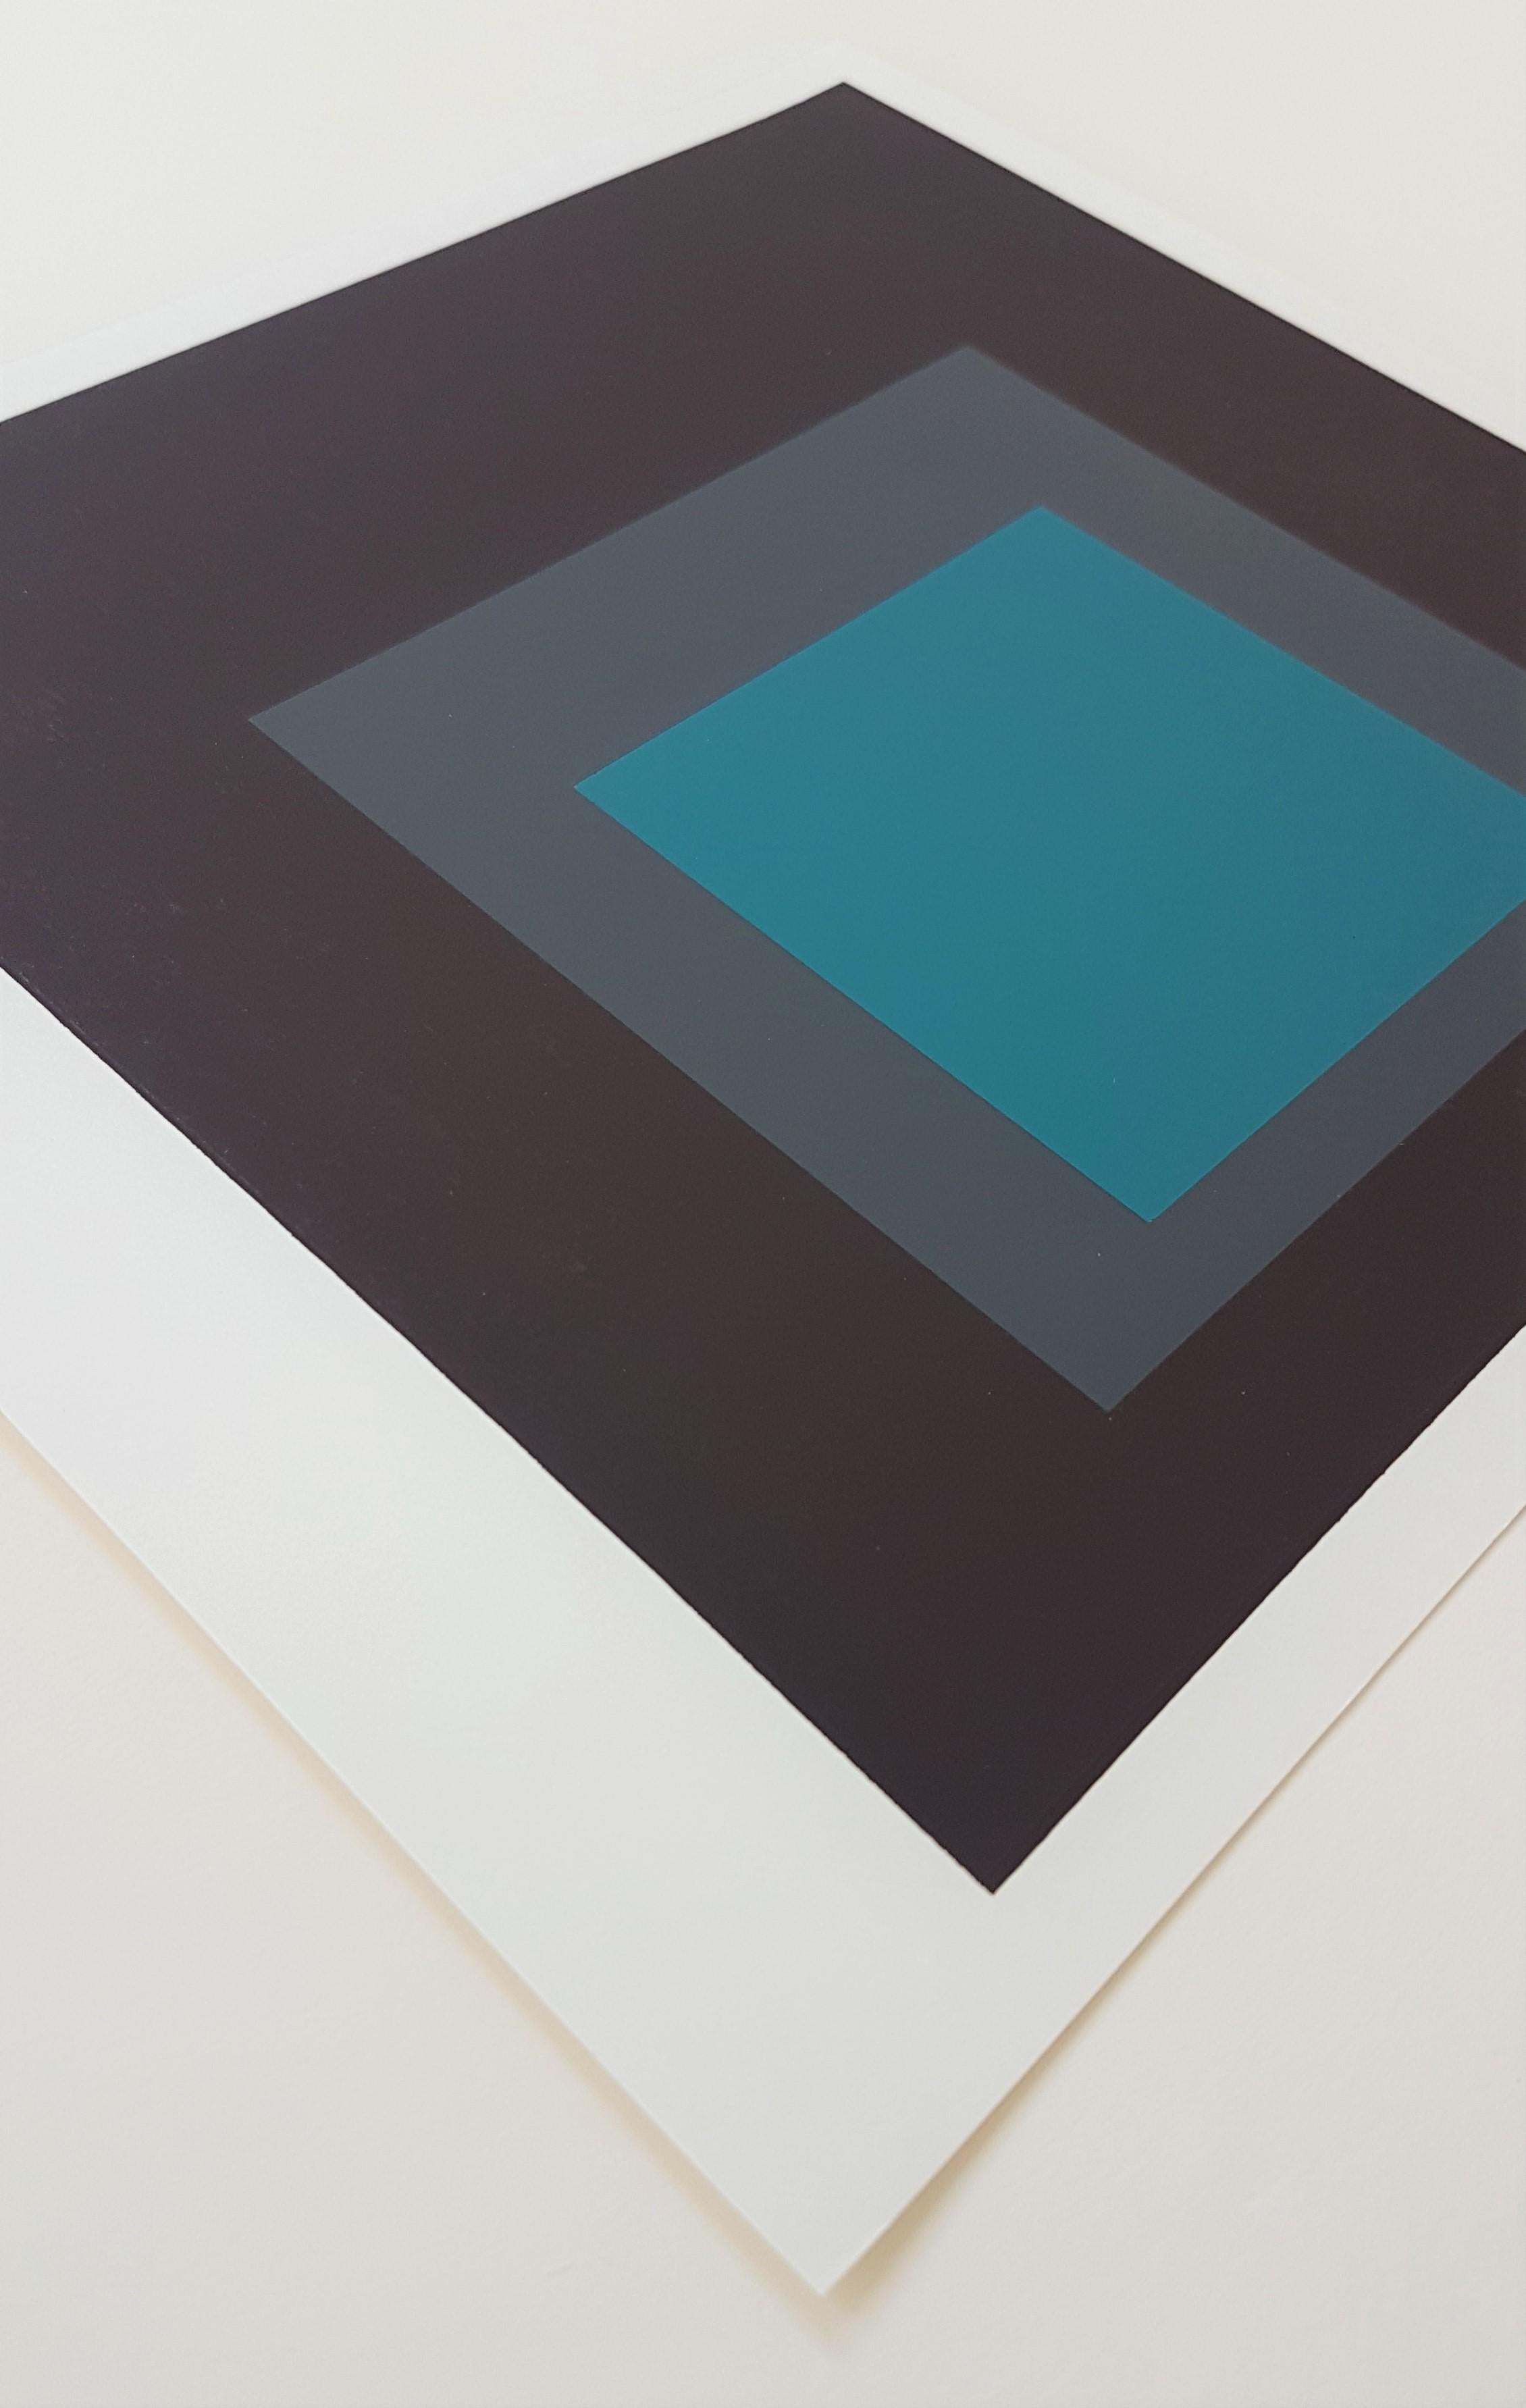 Homage to the Square - Minimalist Print by (after) Josef Albers